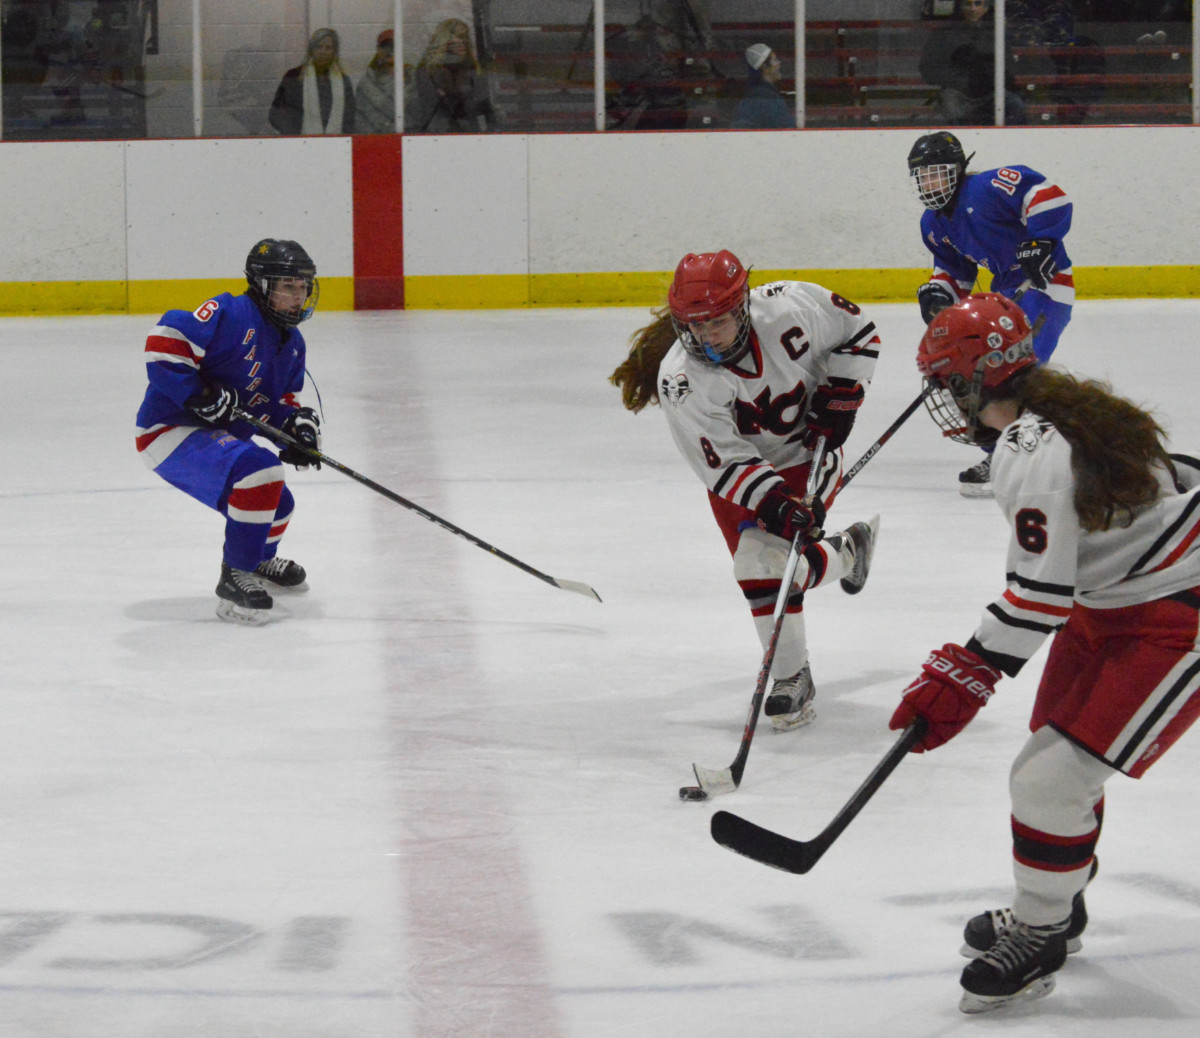 Girls’ ice hockey falls to Fairfield co-op in overtime in rematch